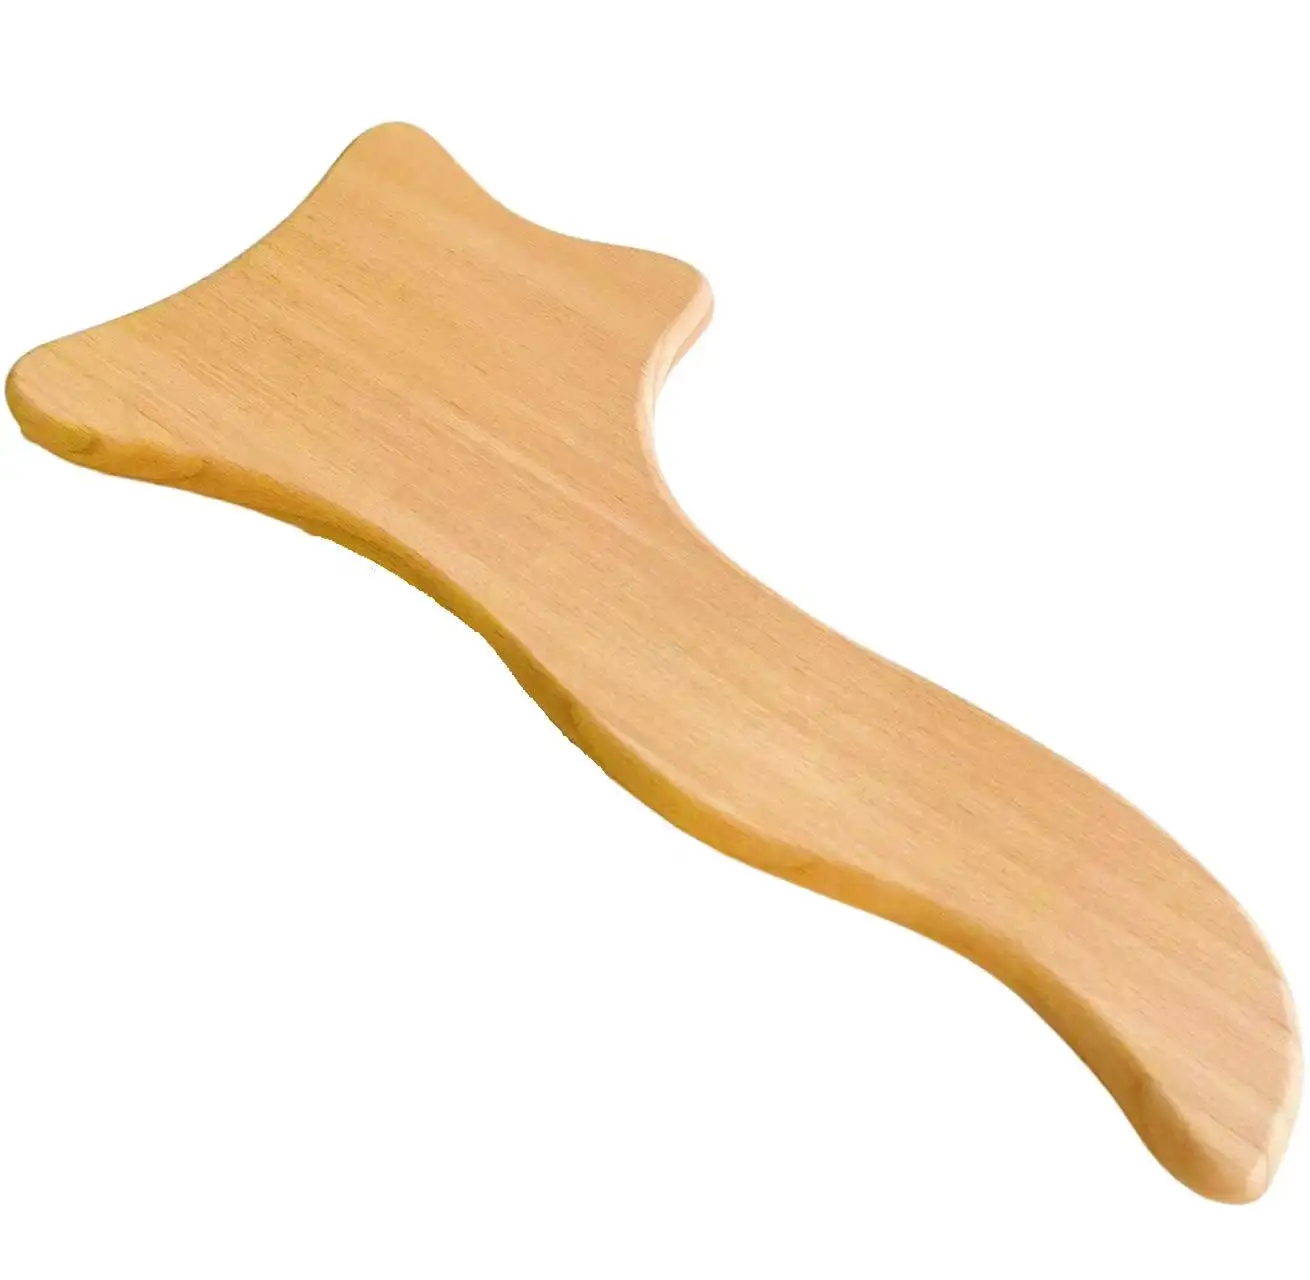 Treatment Of Lymphatic Drainage Paddle Guasha Wooden Board Soft Tissue Therapy Massage Tool